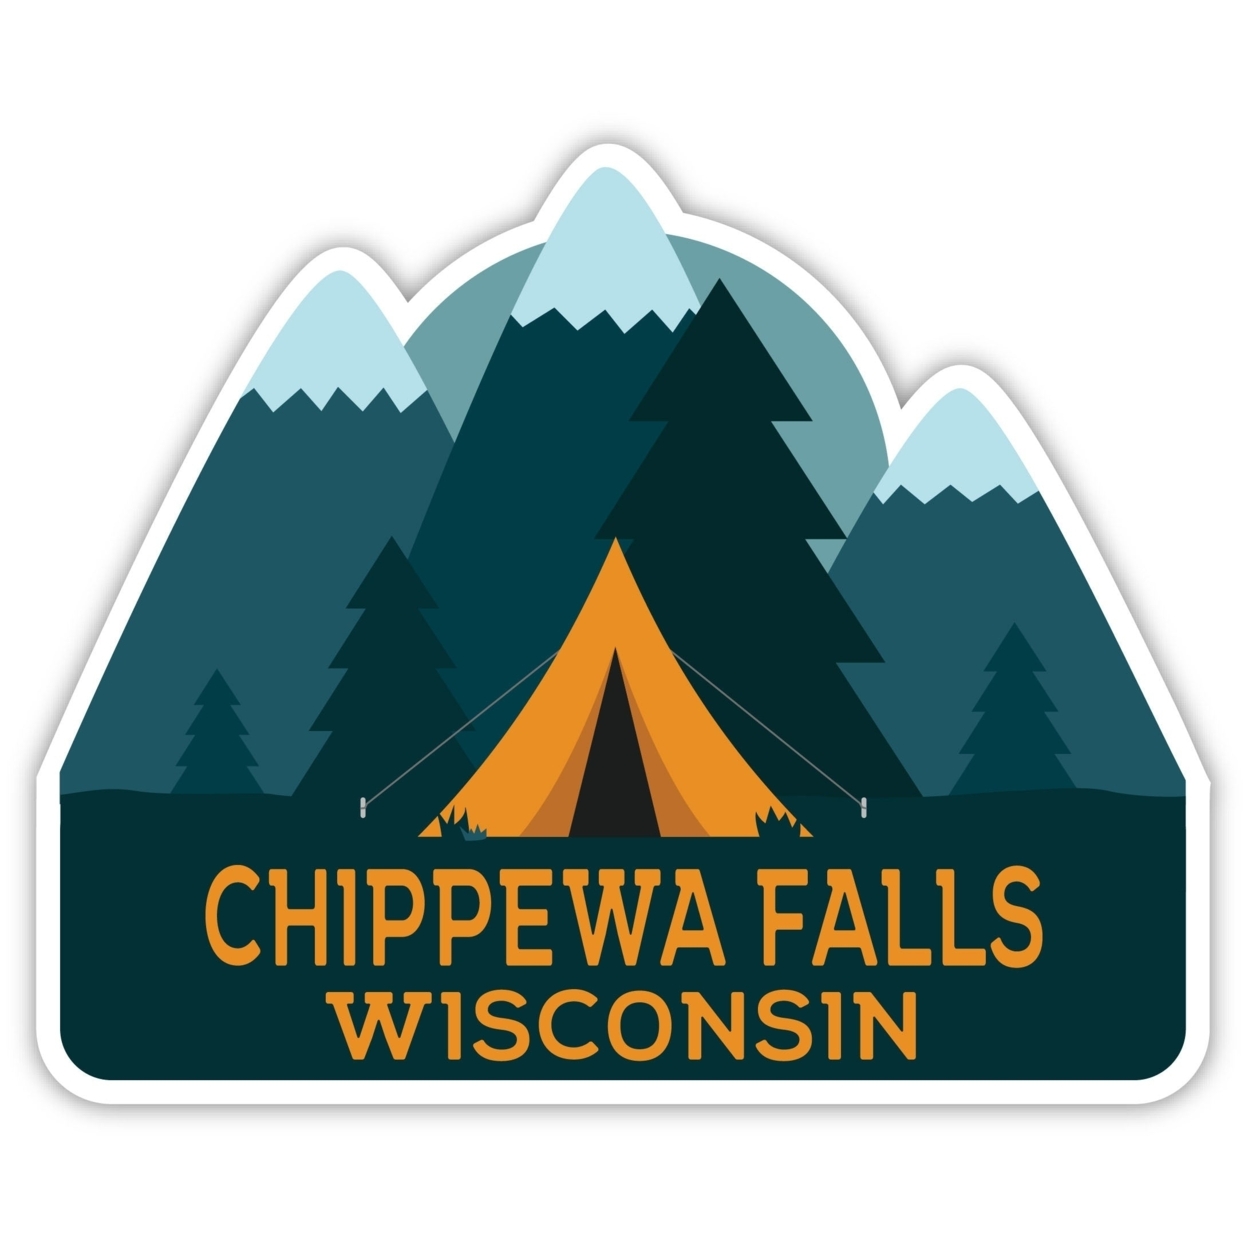 Chippewa Falls Wisconsin Souvenir Decorative Stickers (Choose Theme And Size) - 4-Pack, 8-Inch, Tent